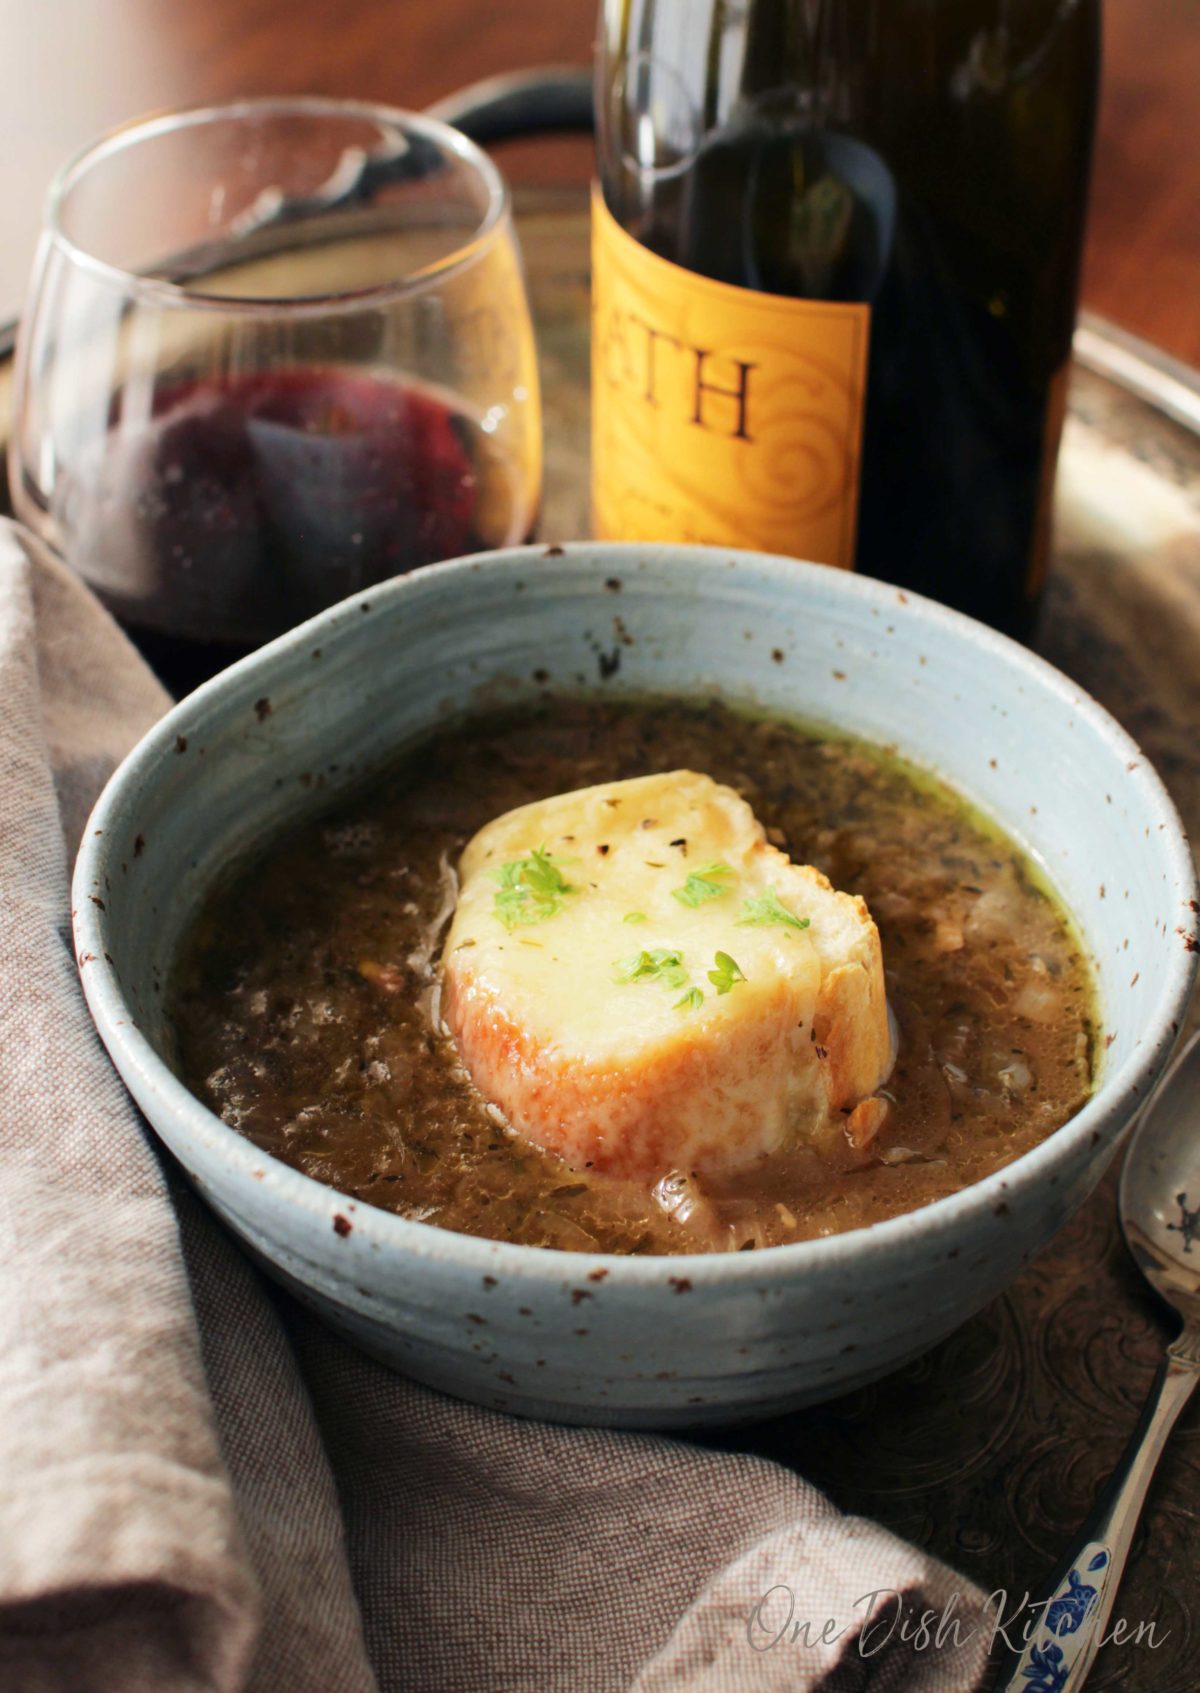 A bowl of french onion soup on a metal tray with a glass and bottle of red wine and a spoon.